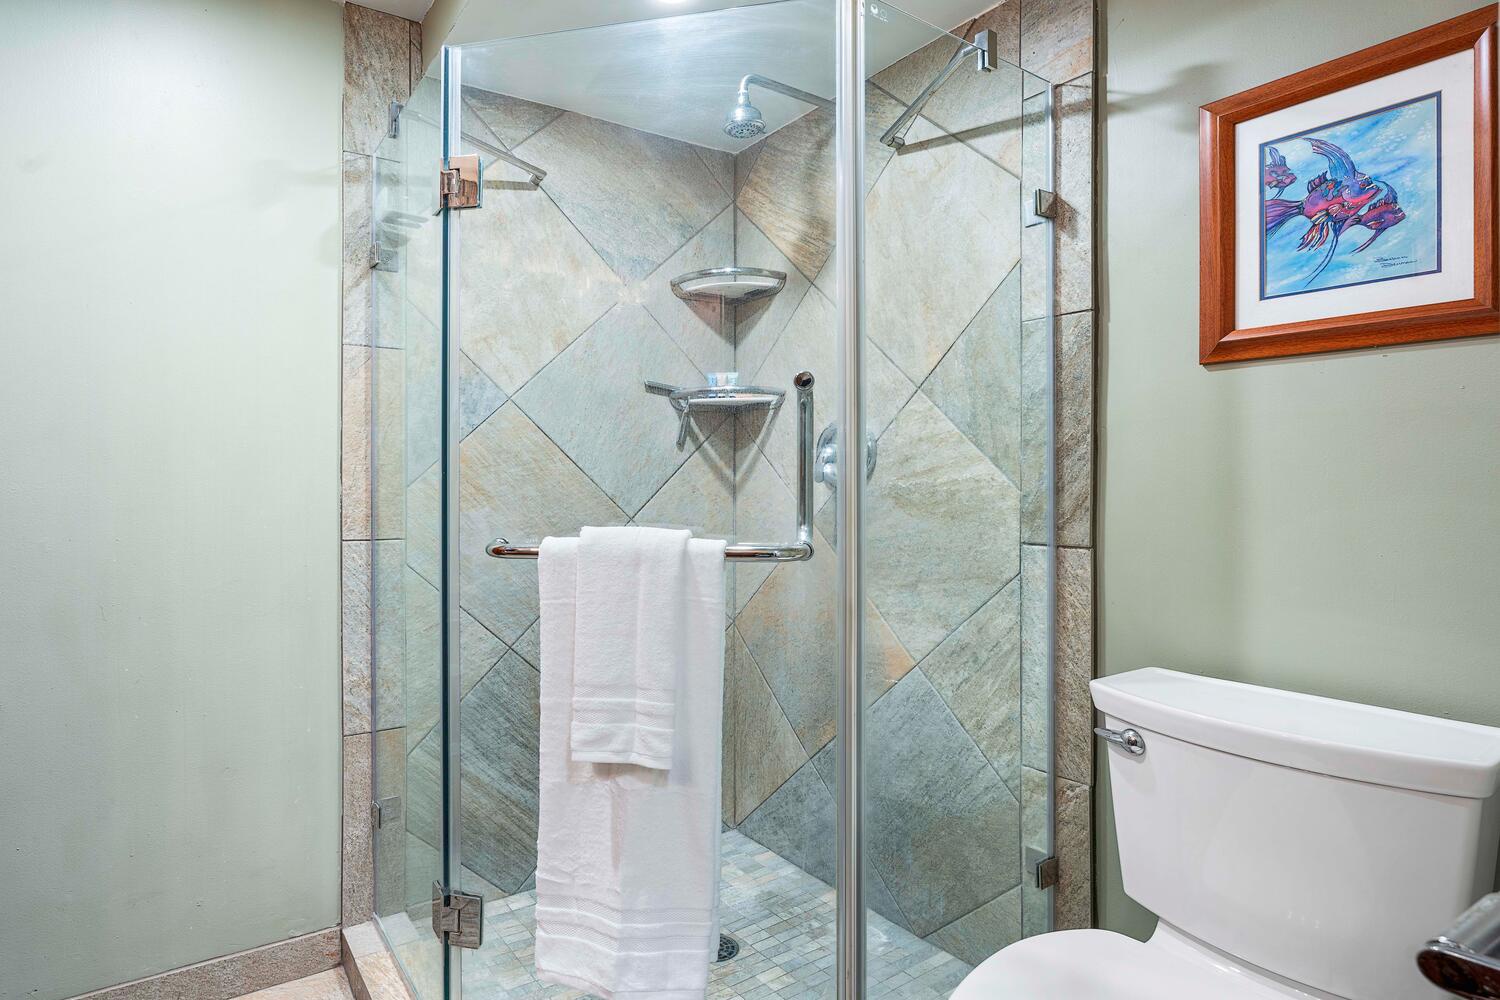 Kailua Kona Vacation Rentals, Kona Alii 302 - Complete with a walk-in shower in a glass enclosure.